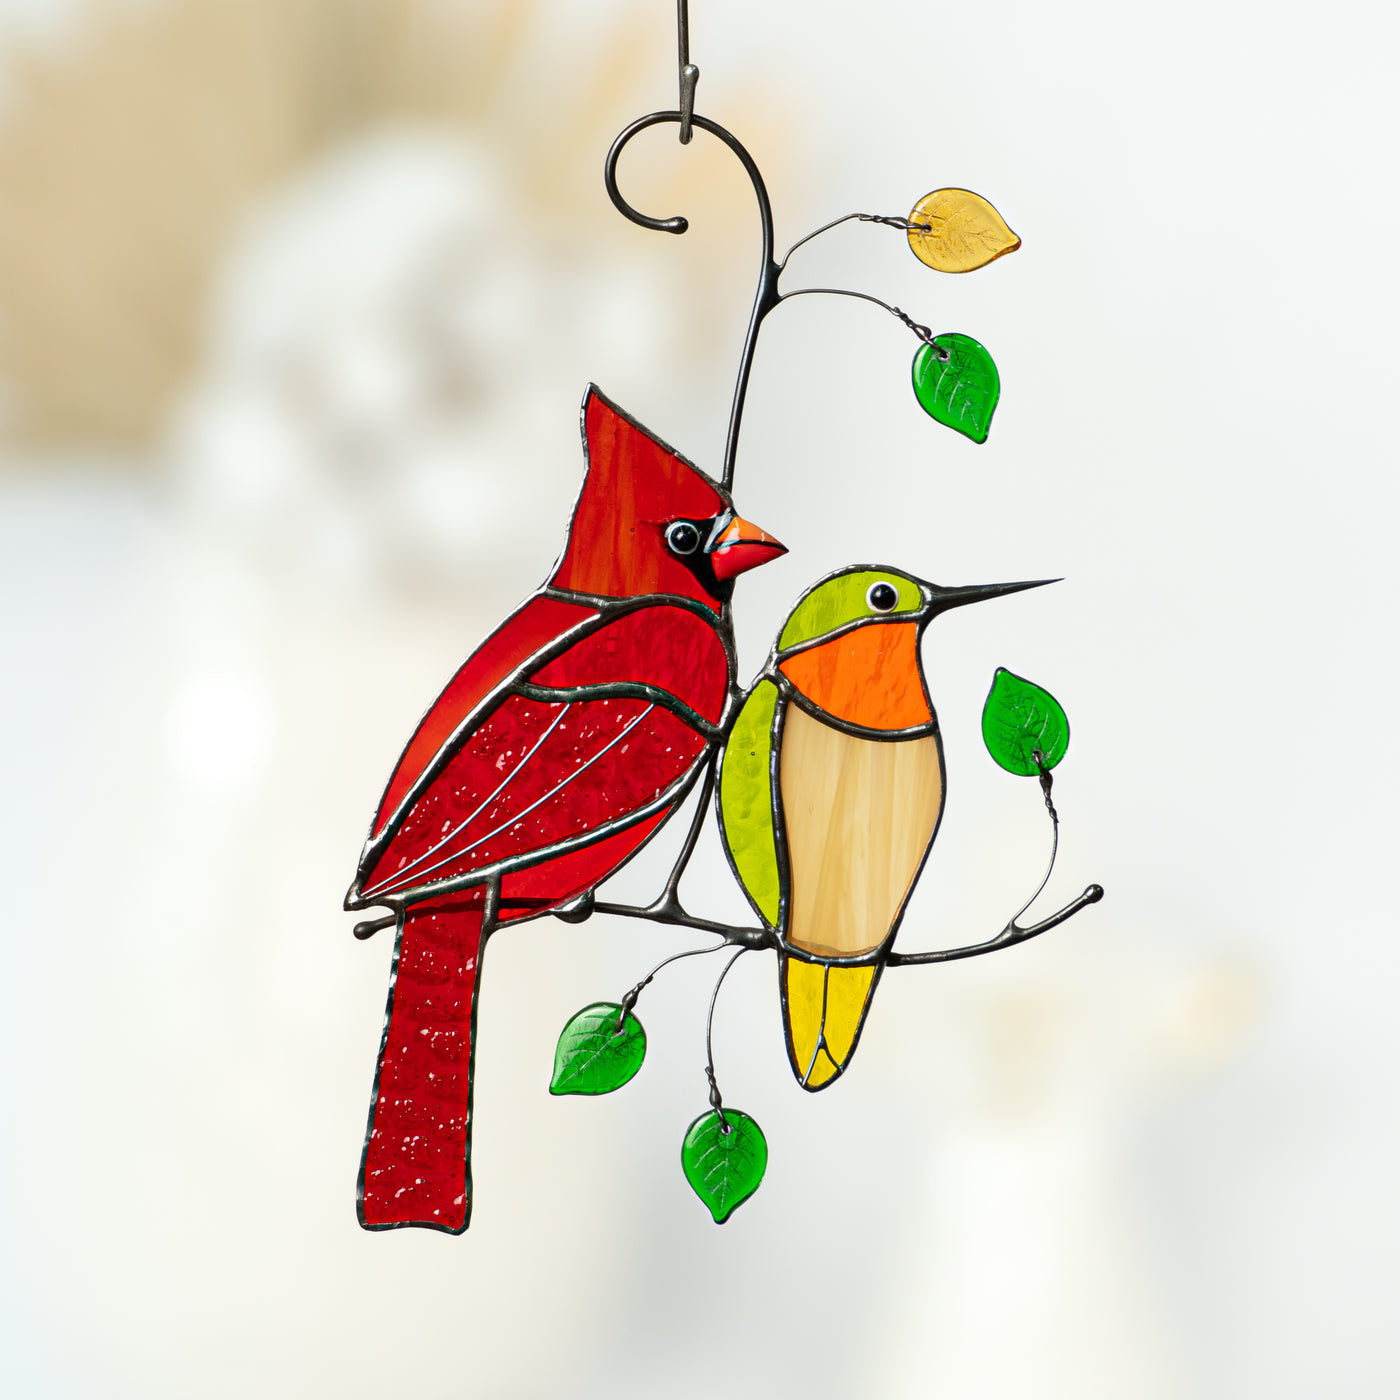 Stained glass suncatcher of a red cardinal and green hummingbird sitting on the branch